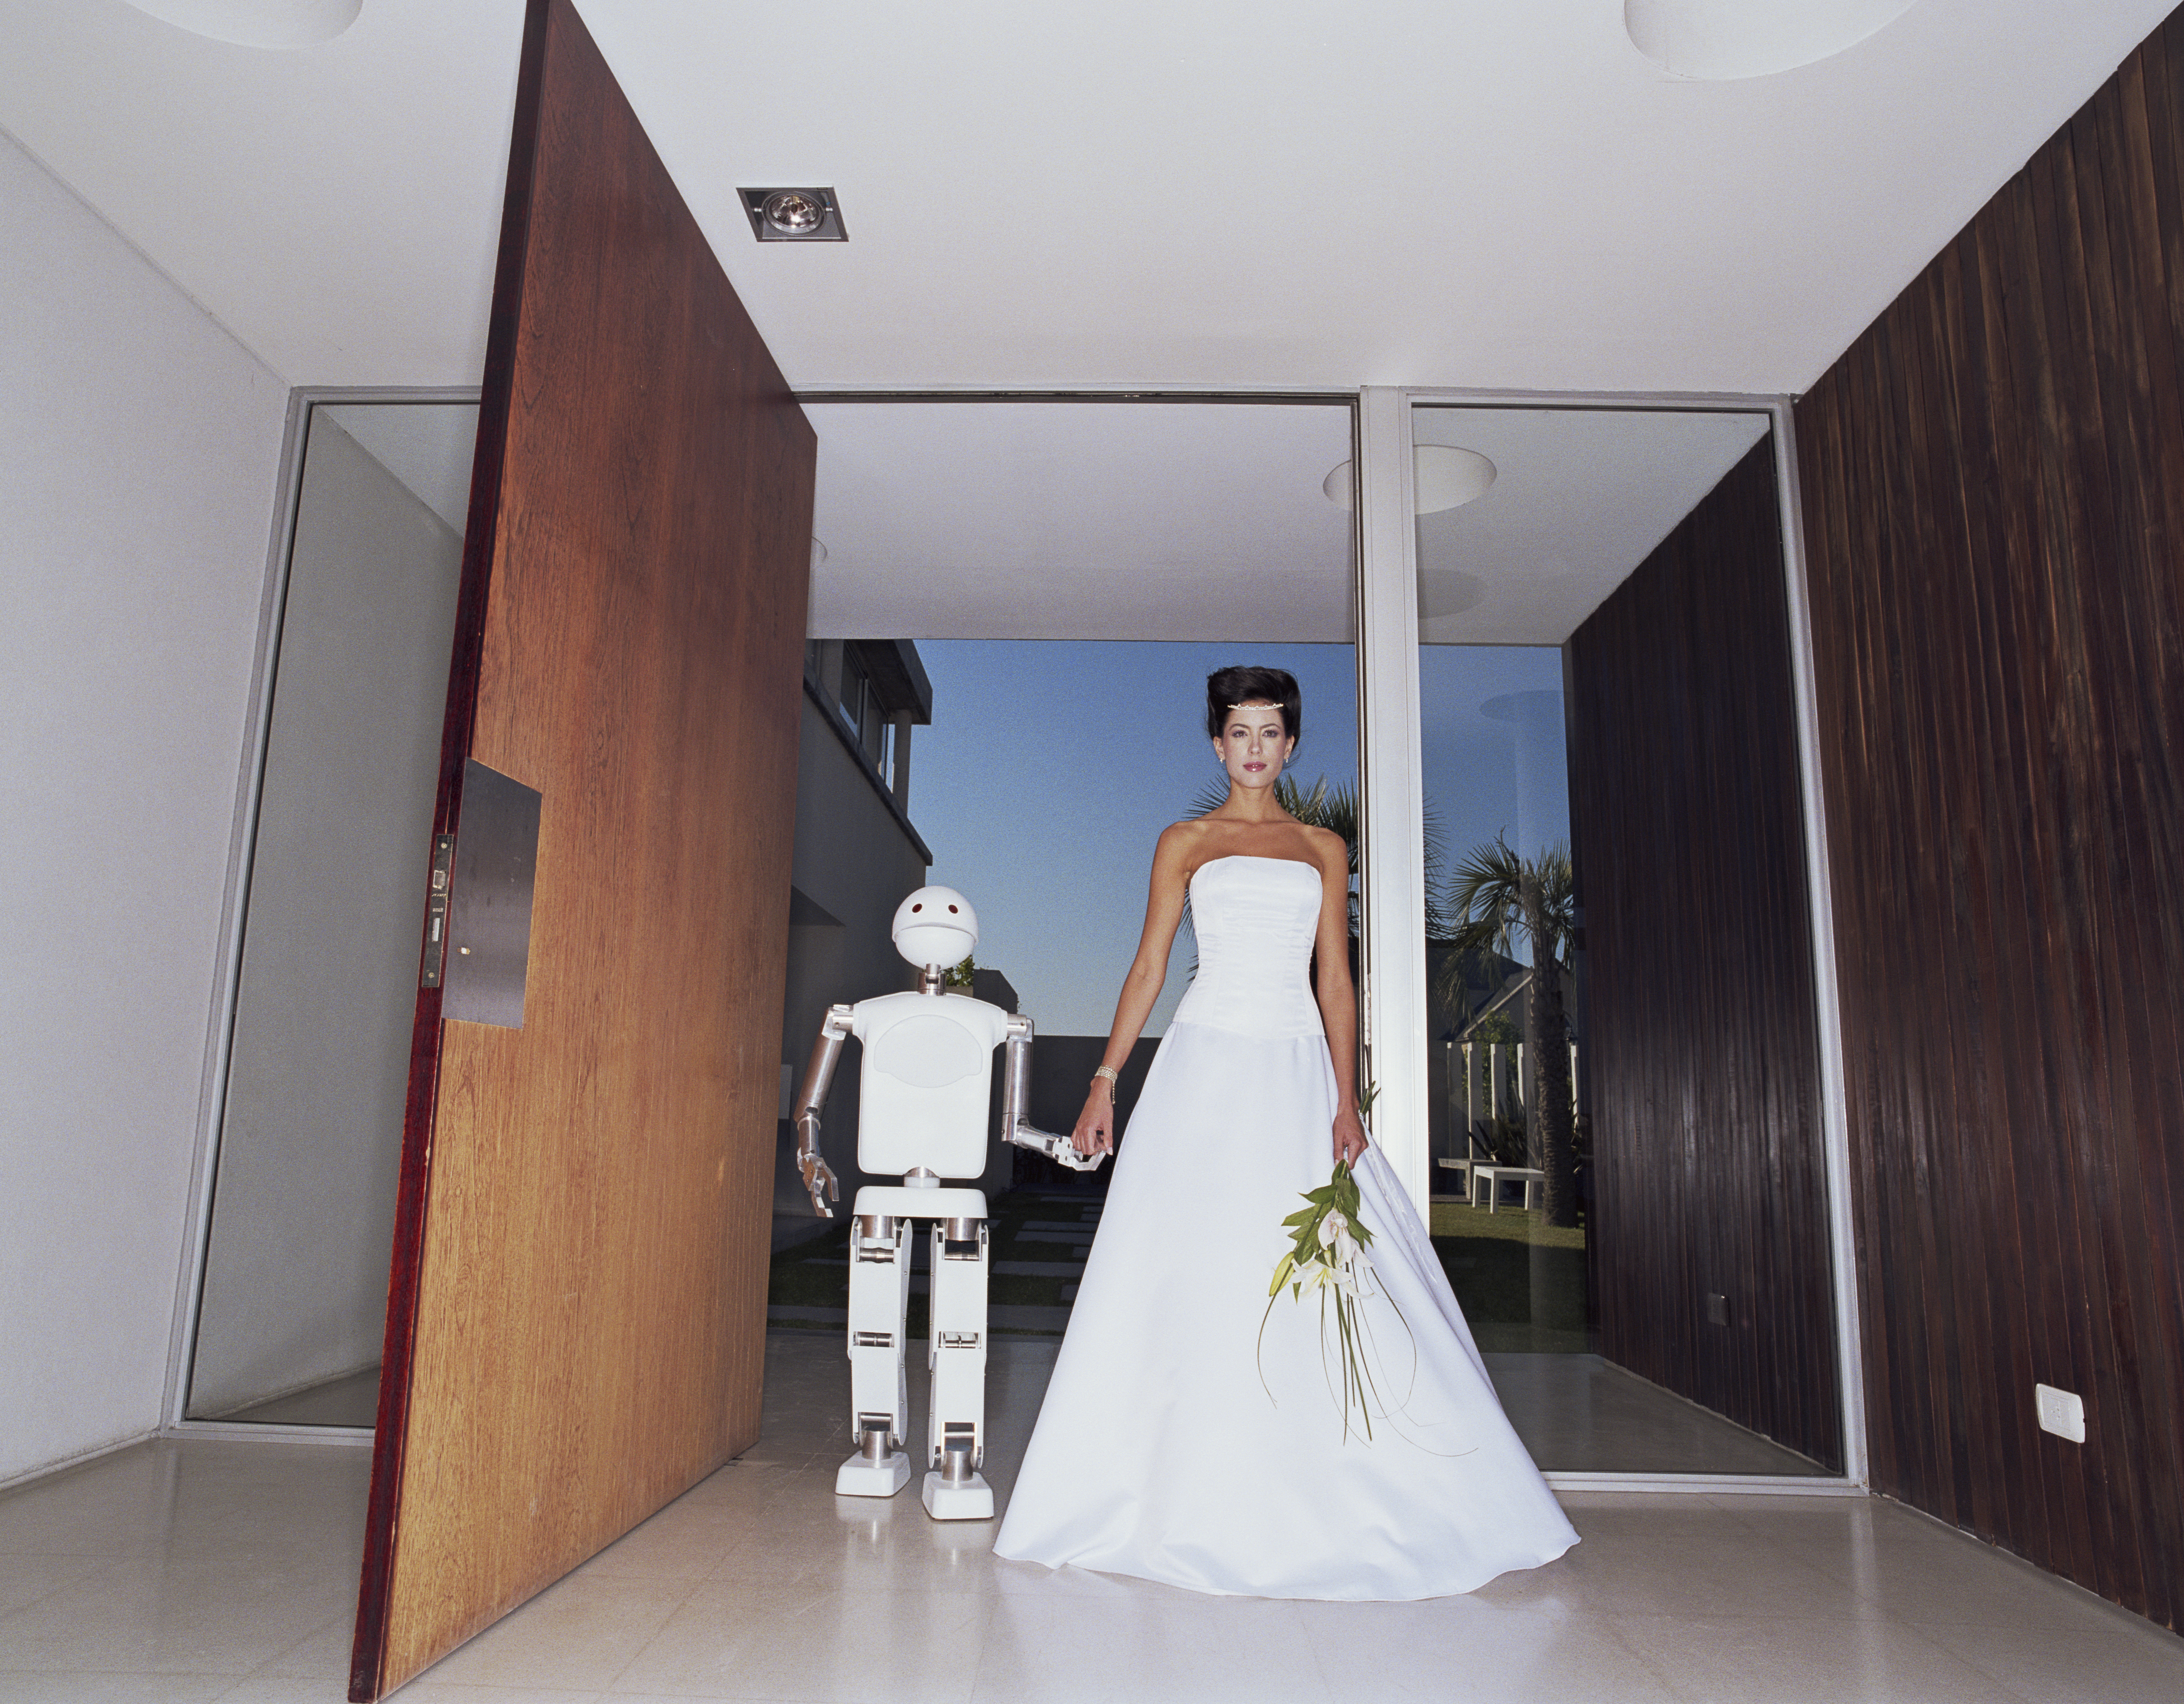 Bride and robot holding hands in entryway of house, portrait